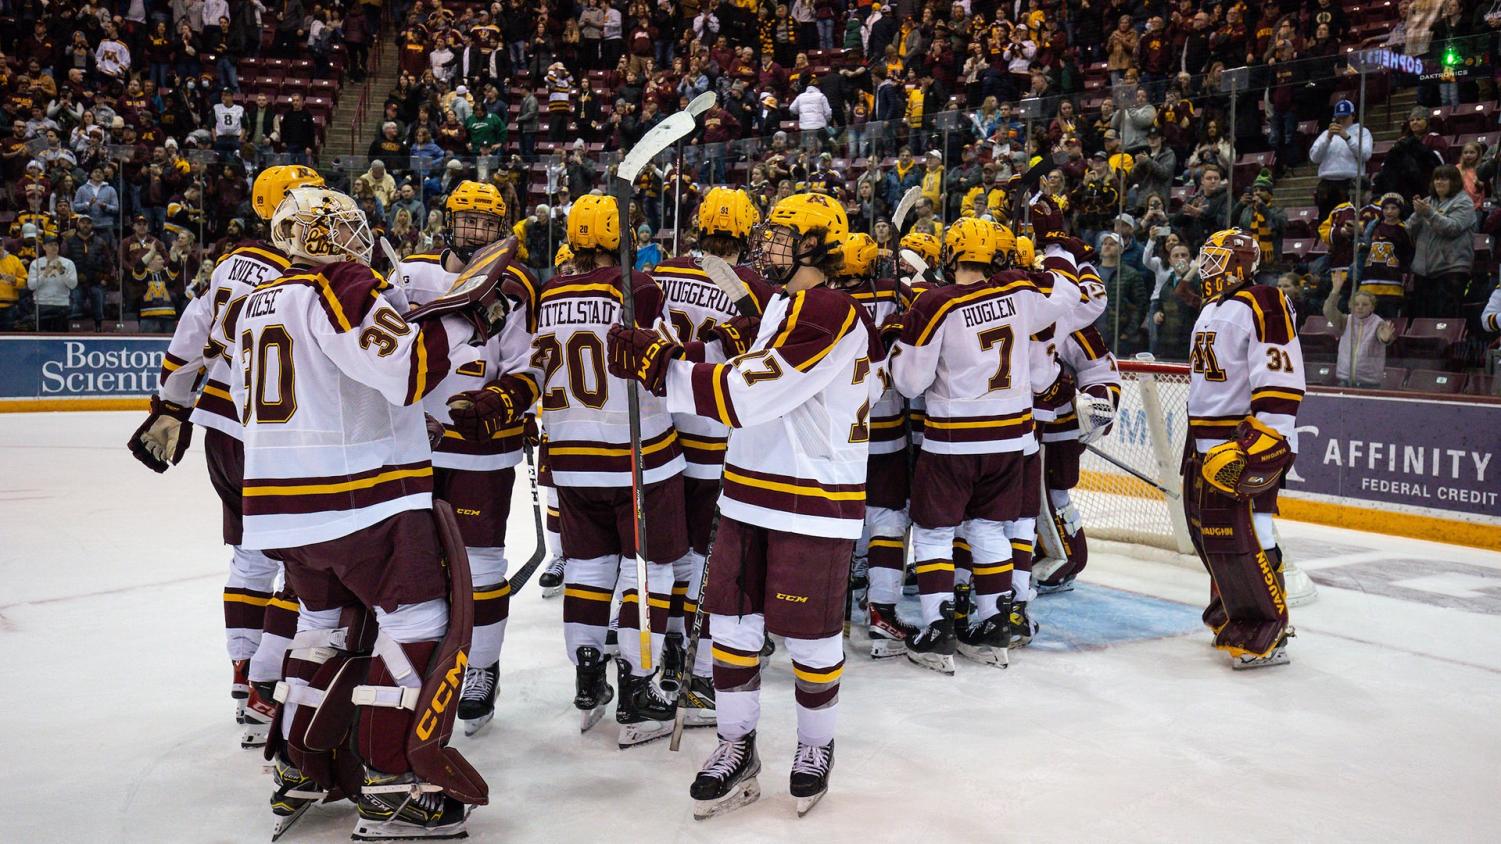 Gophers men's hockey returns to Grand Forks after long absence